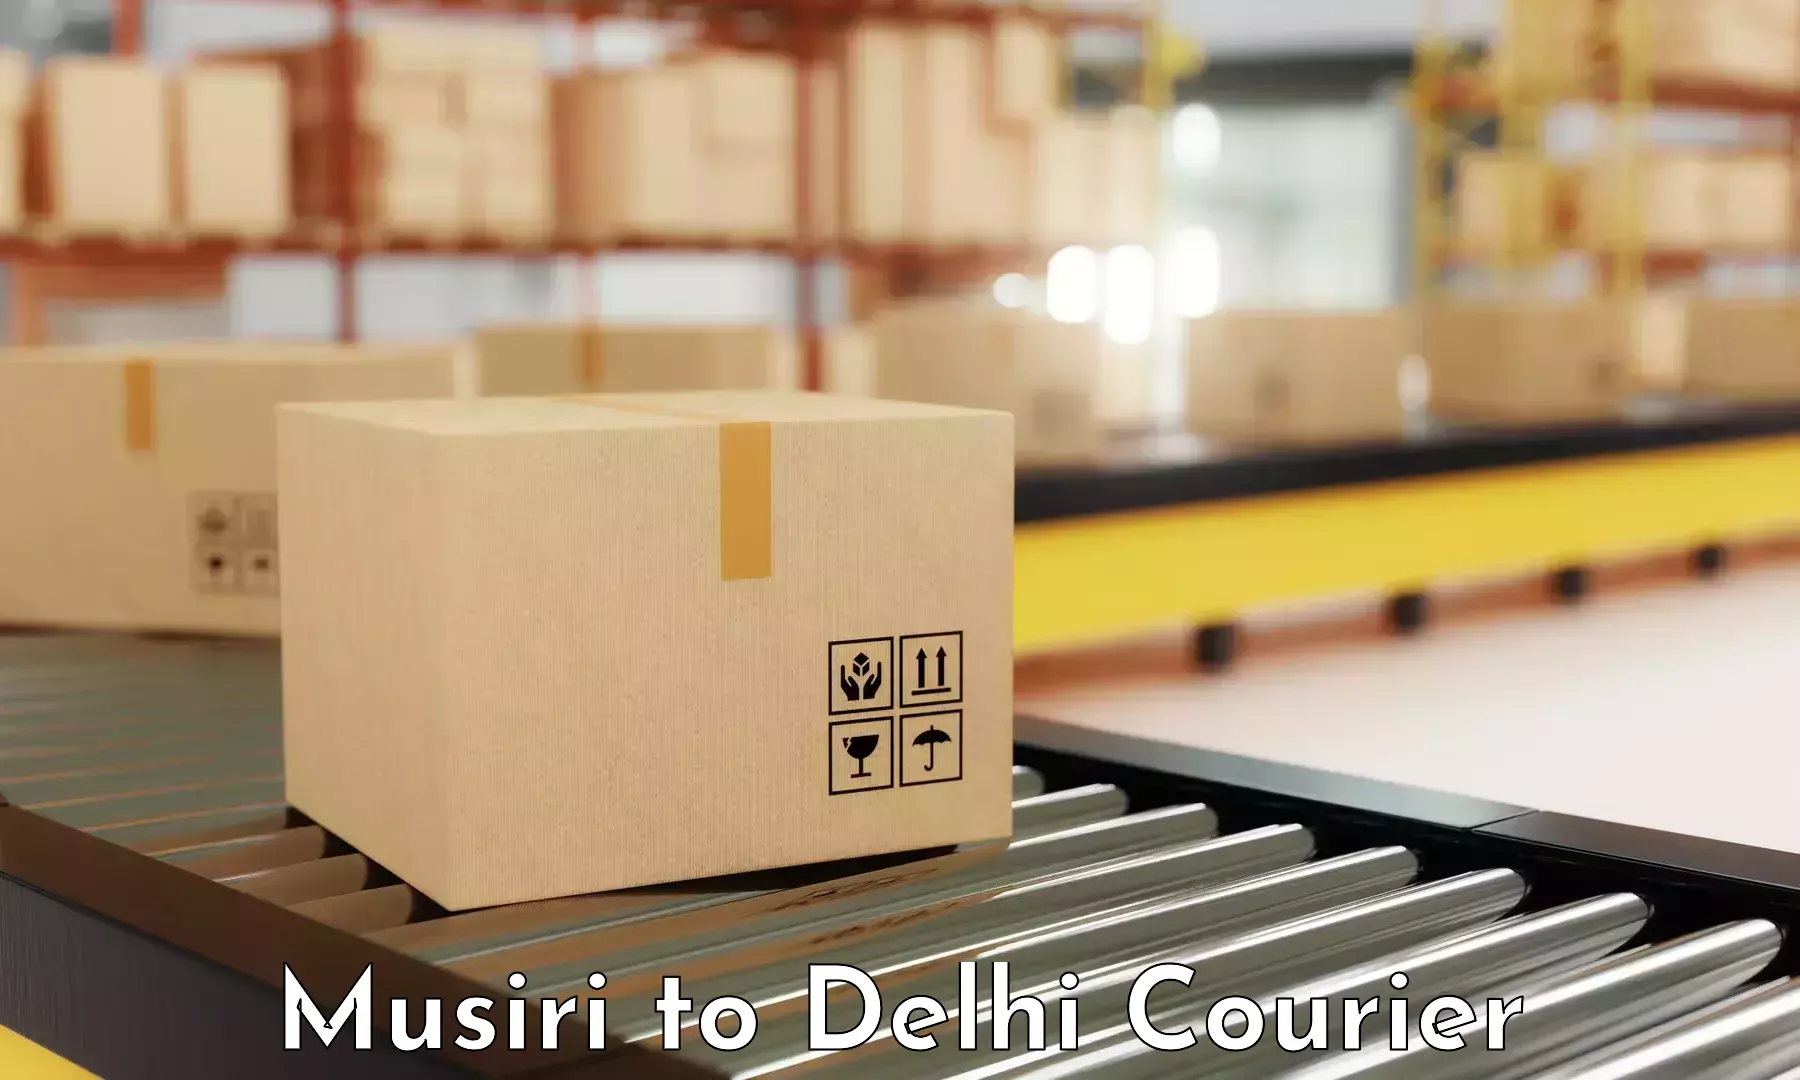 Subscription-based courier Musiri to NCR